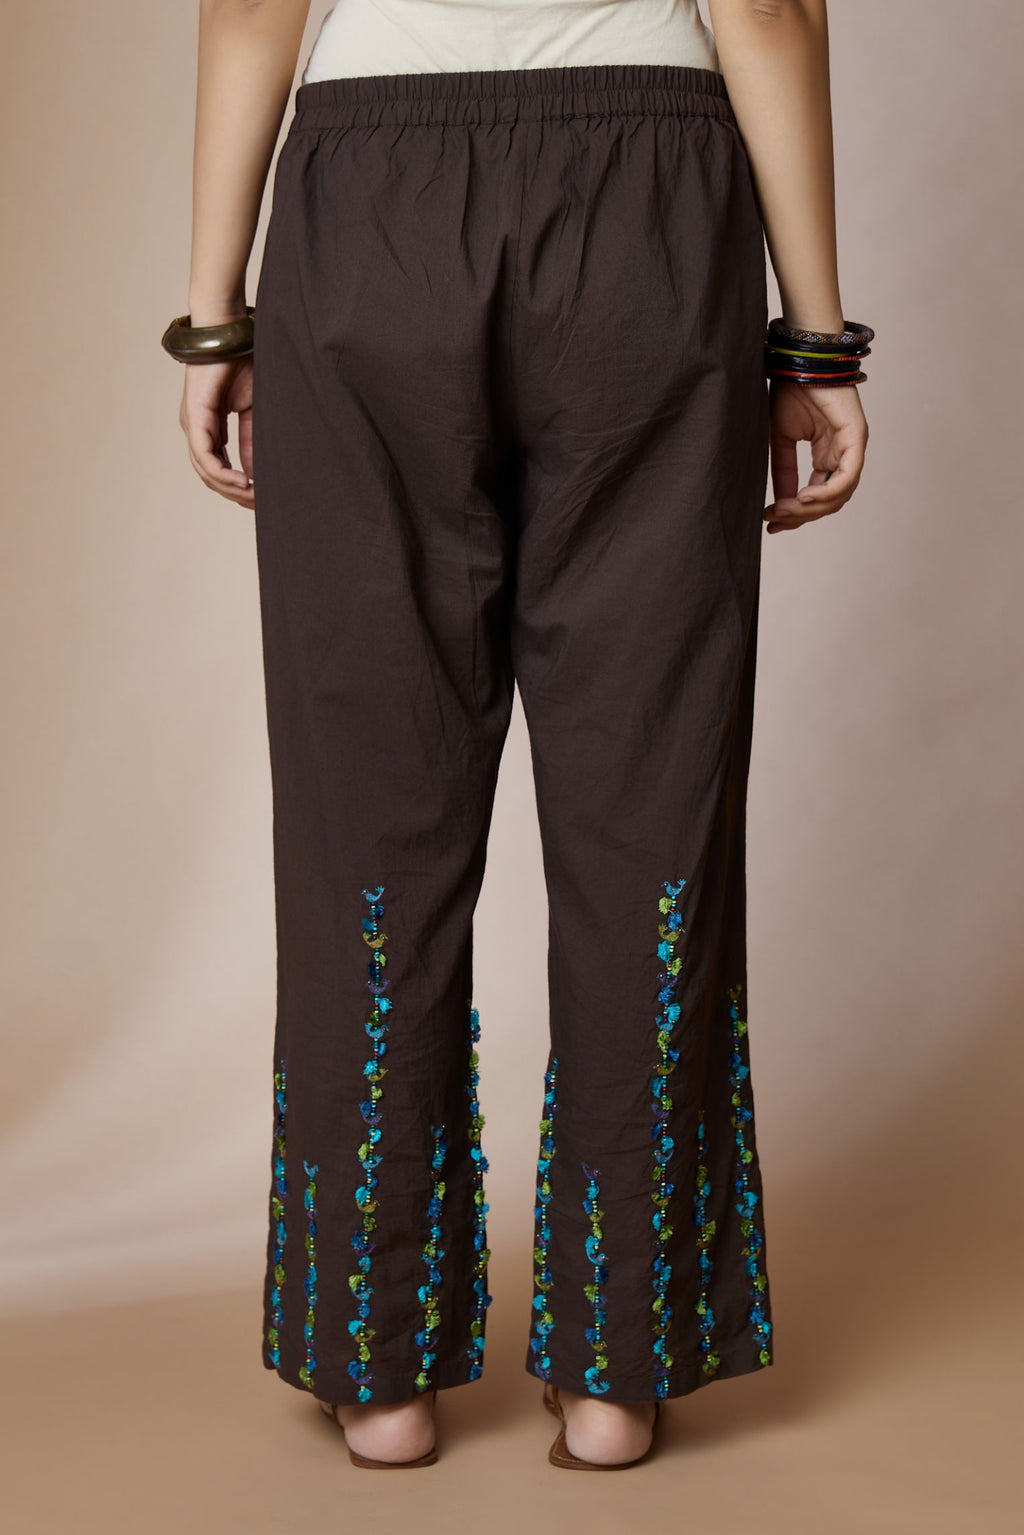 Cocoa brown cotton straight pants with bird and tassel stripes at hem